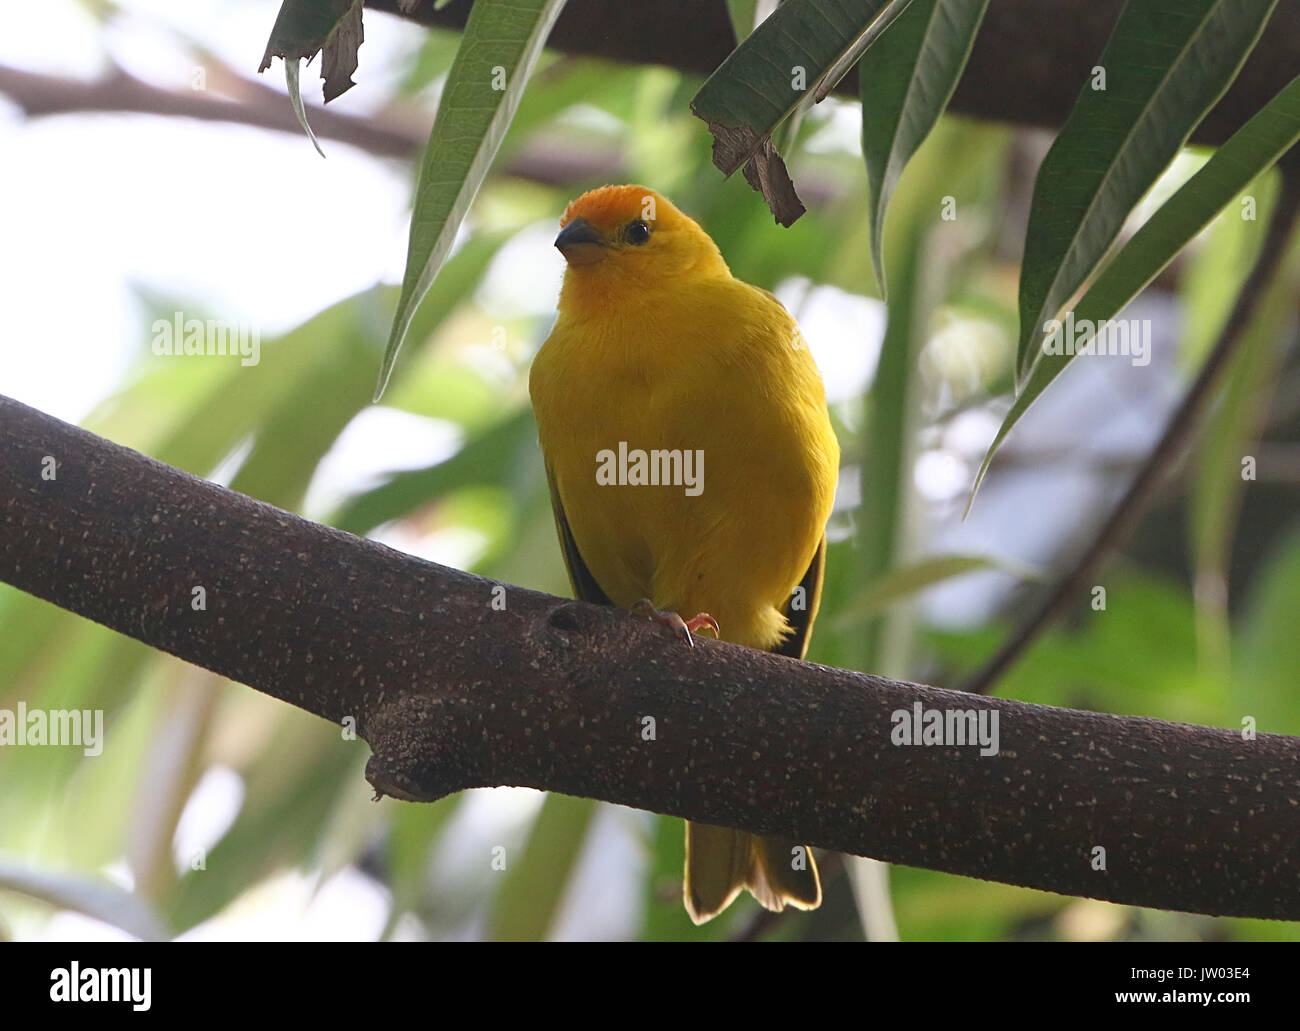 Bouton D'or High Resolution Stock Photography and Images - Alamy